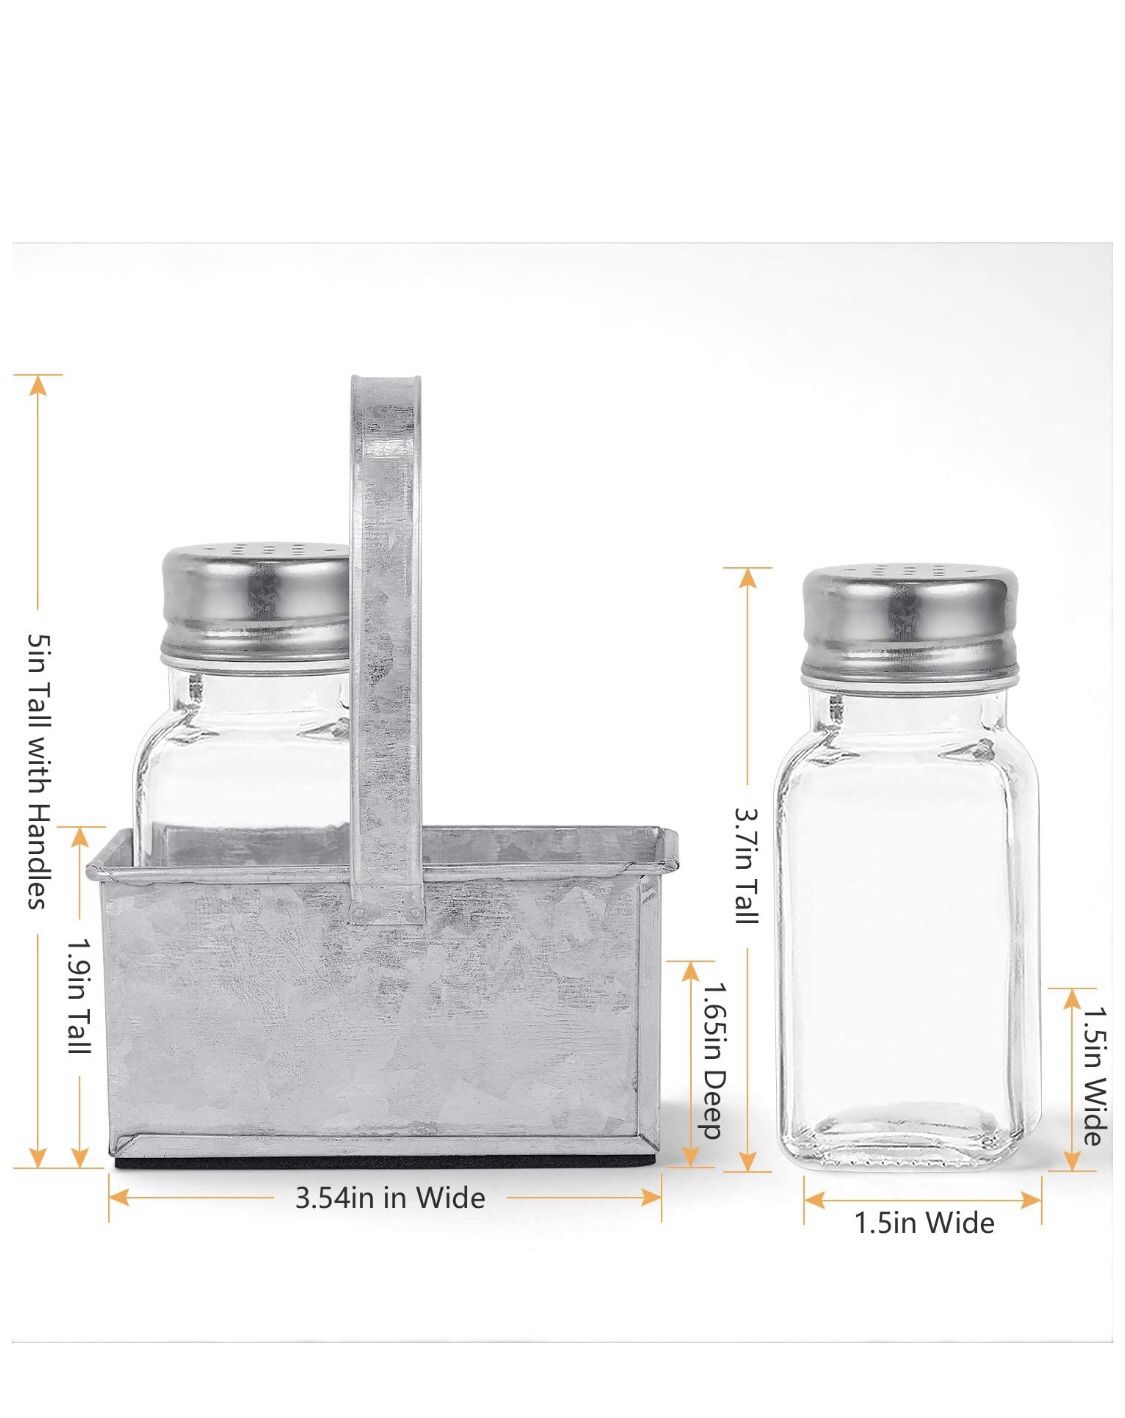 Biewoos Salt and Pepper Shaker Set with Farmhouse Premium Padded Caddy, Rustic Vintage Galvanized Table Decor for Kitchen Table Restaurants Weddings